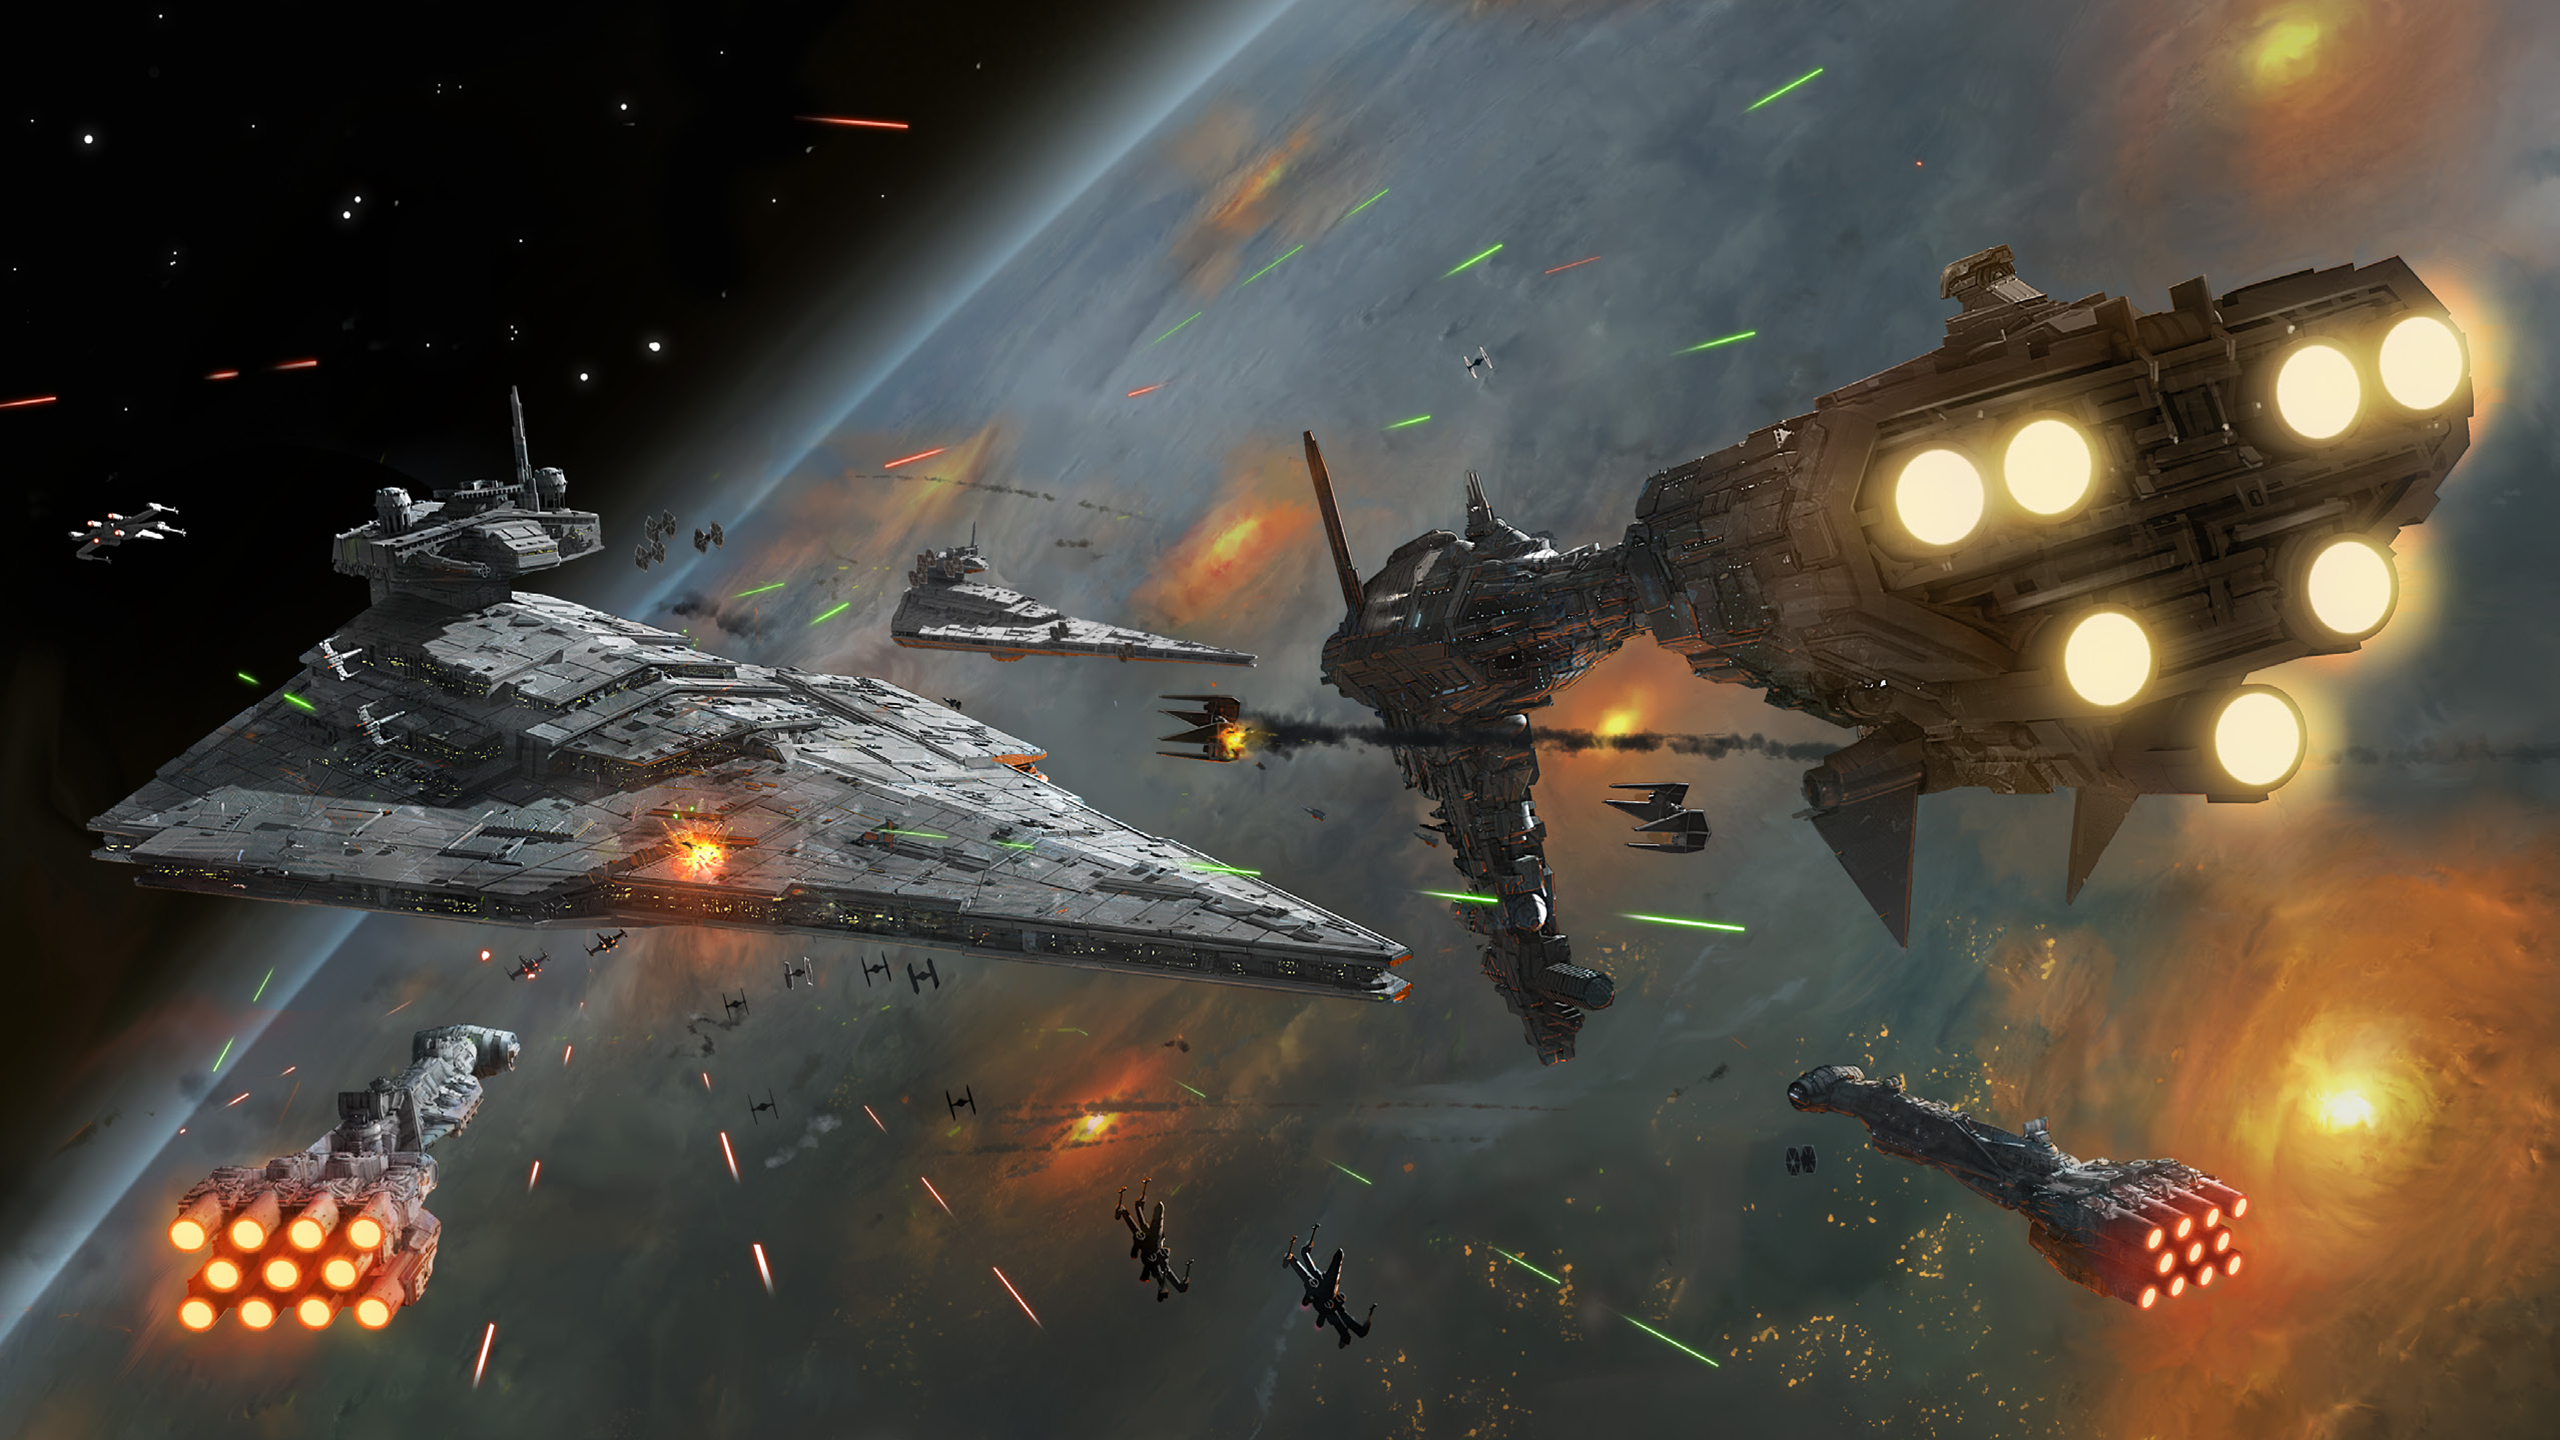 An eclectic collection of background. Star wars ships, Star wars image, Star wars